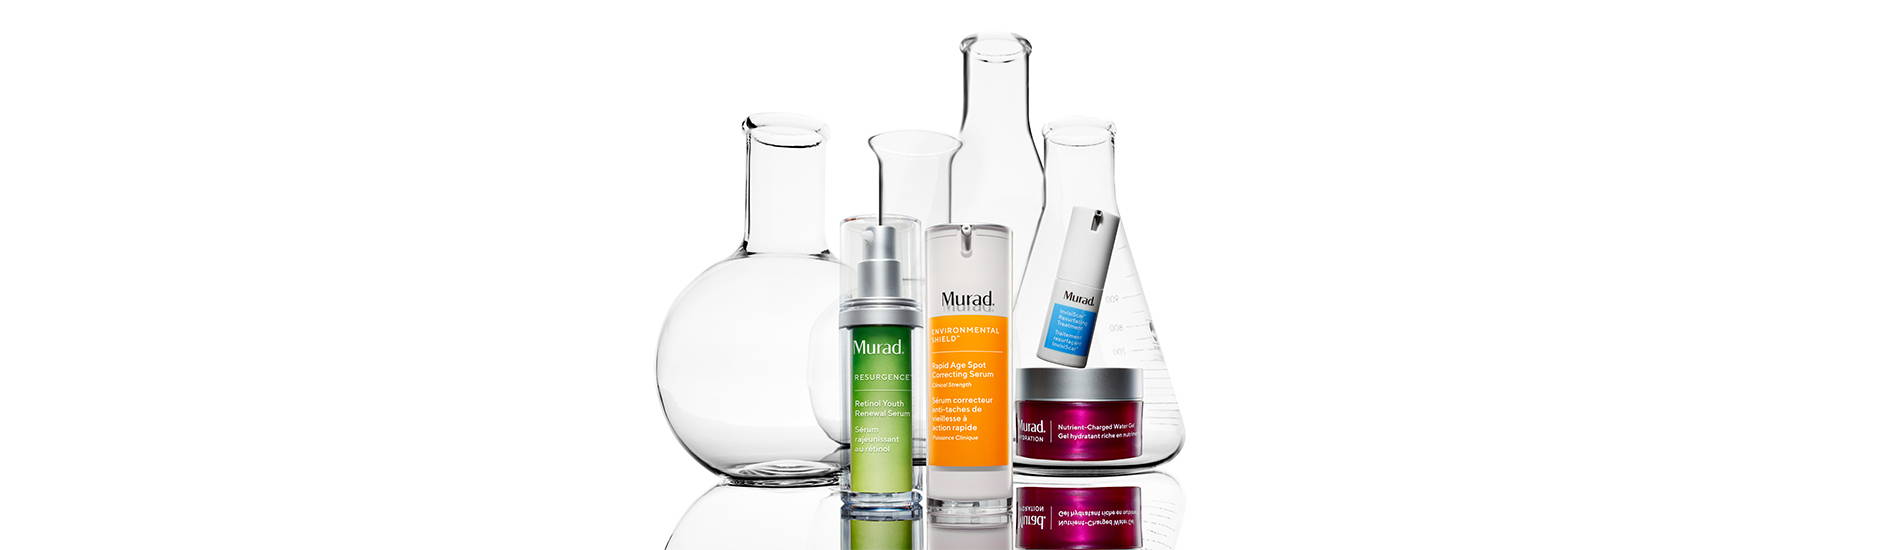 Why Murad Products are Worth It